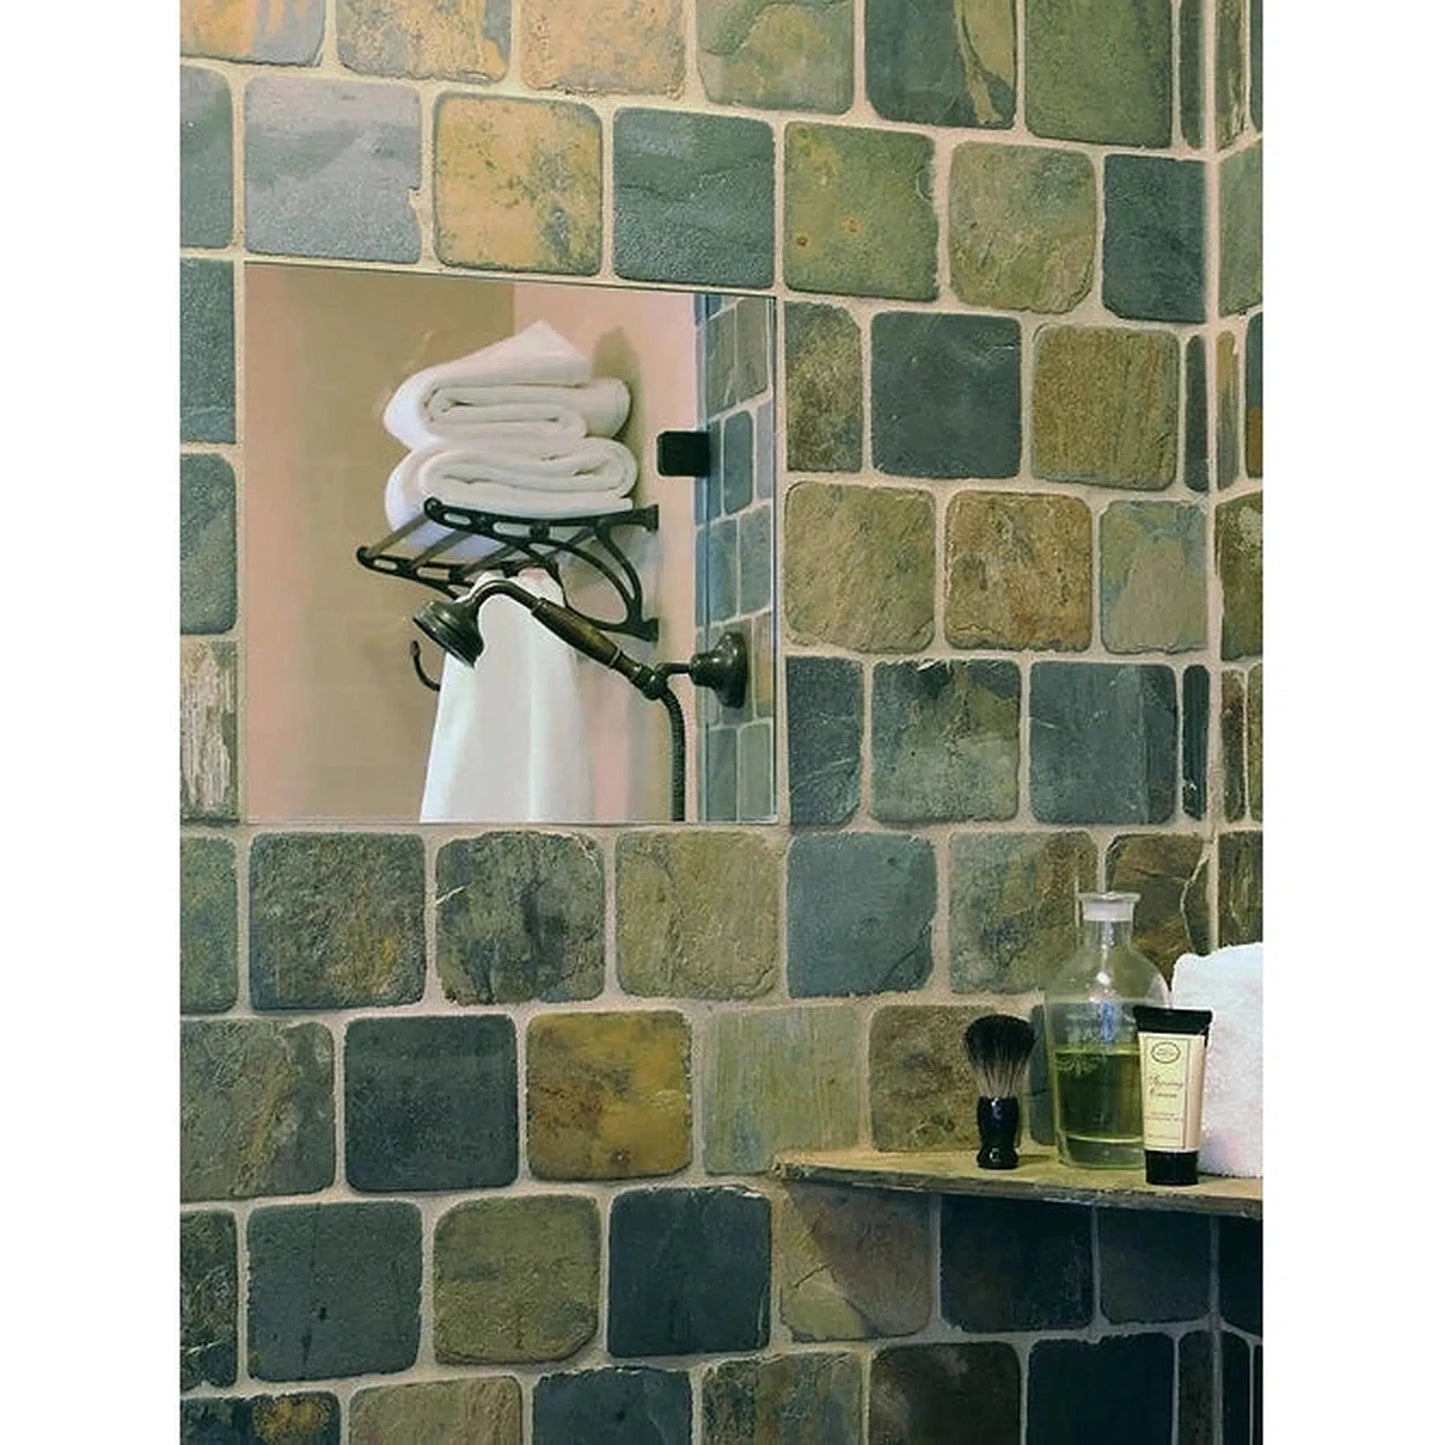 ClearMirror 18" x 18" Fog-Free Wall-Mounted Shower Mirror With Heating Pad